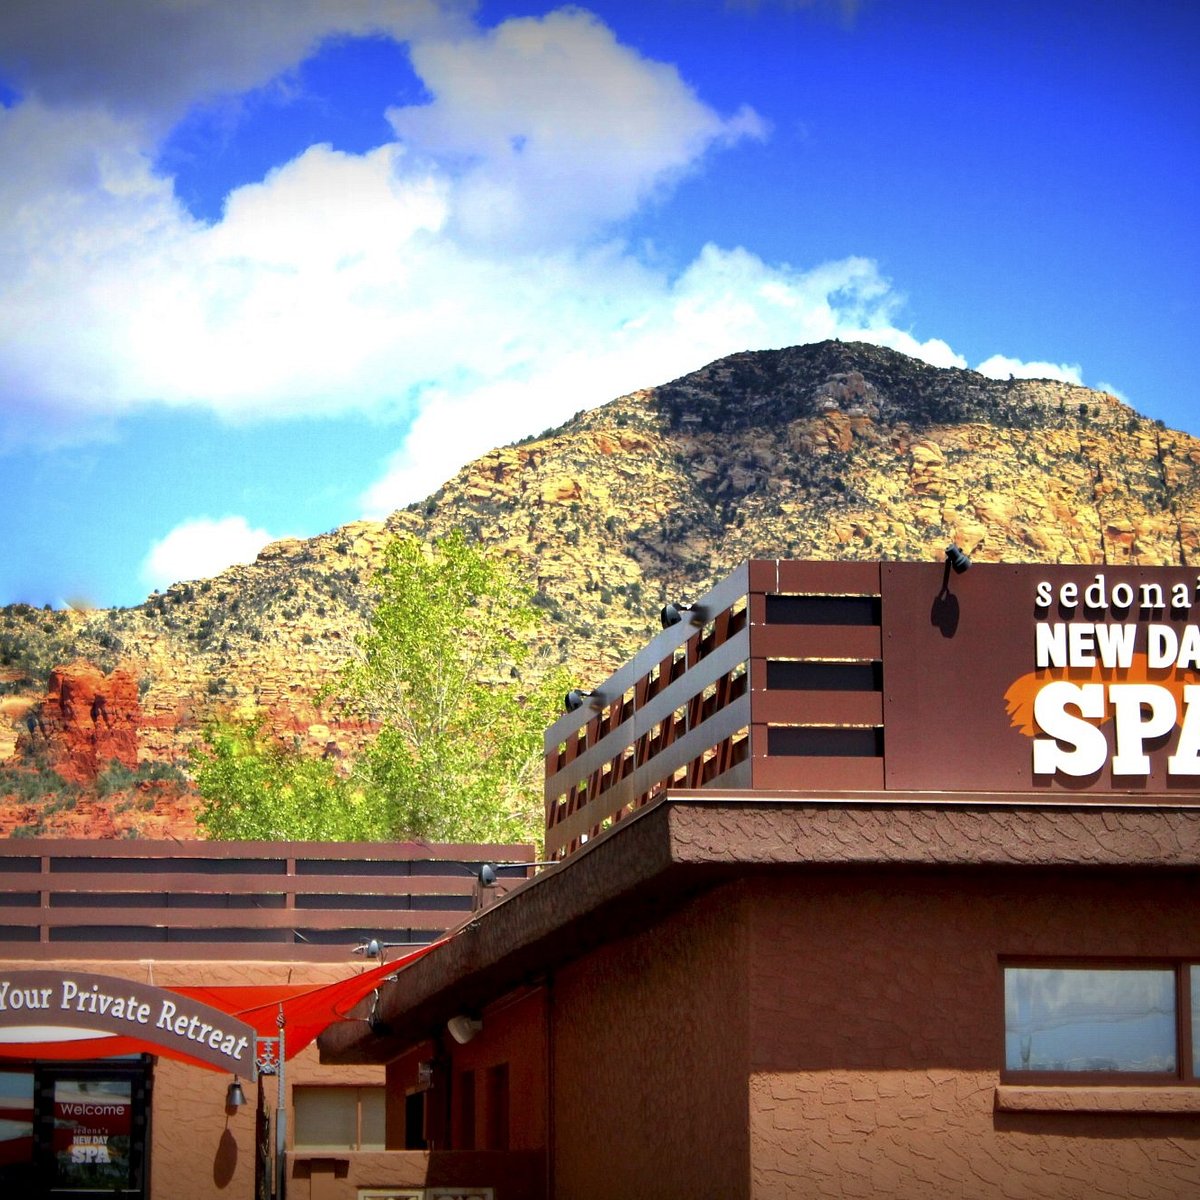 Sedona's New Day Spa All You Need to Know BEFORE You Go